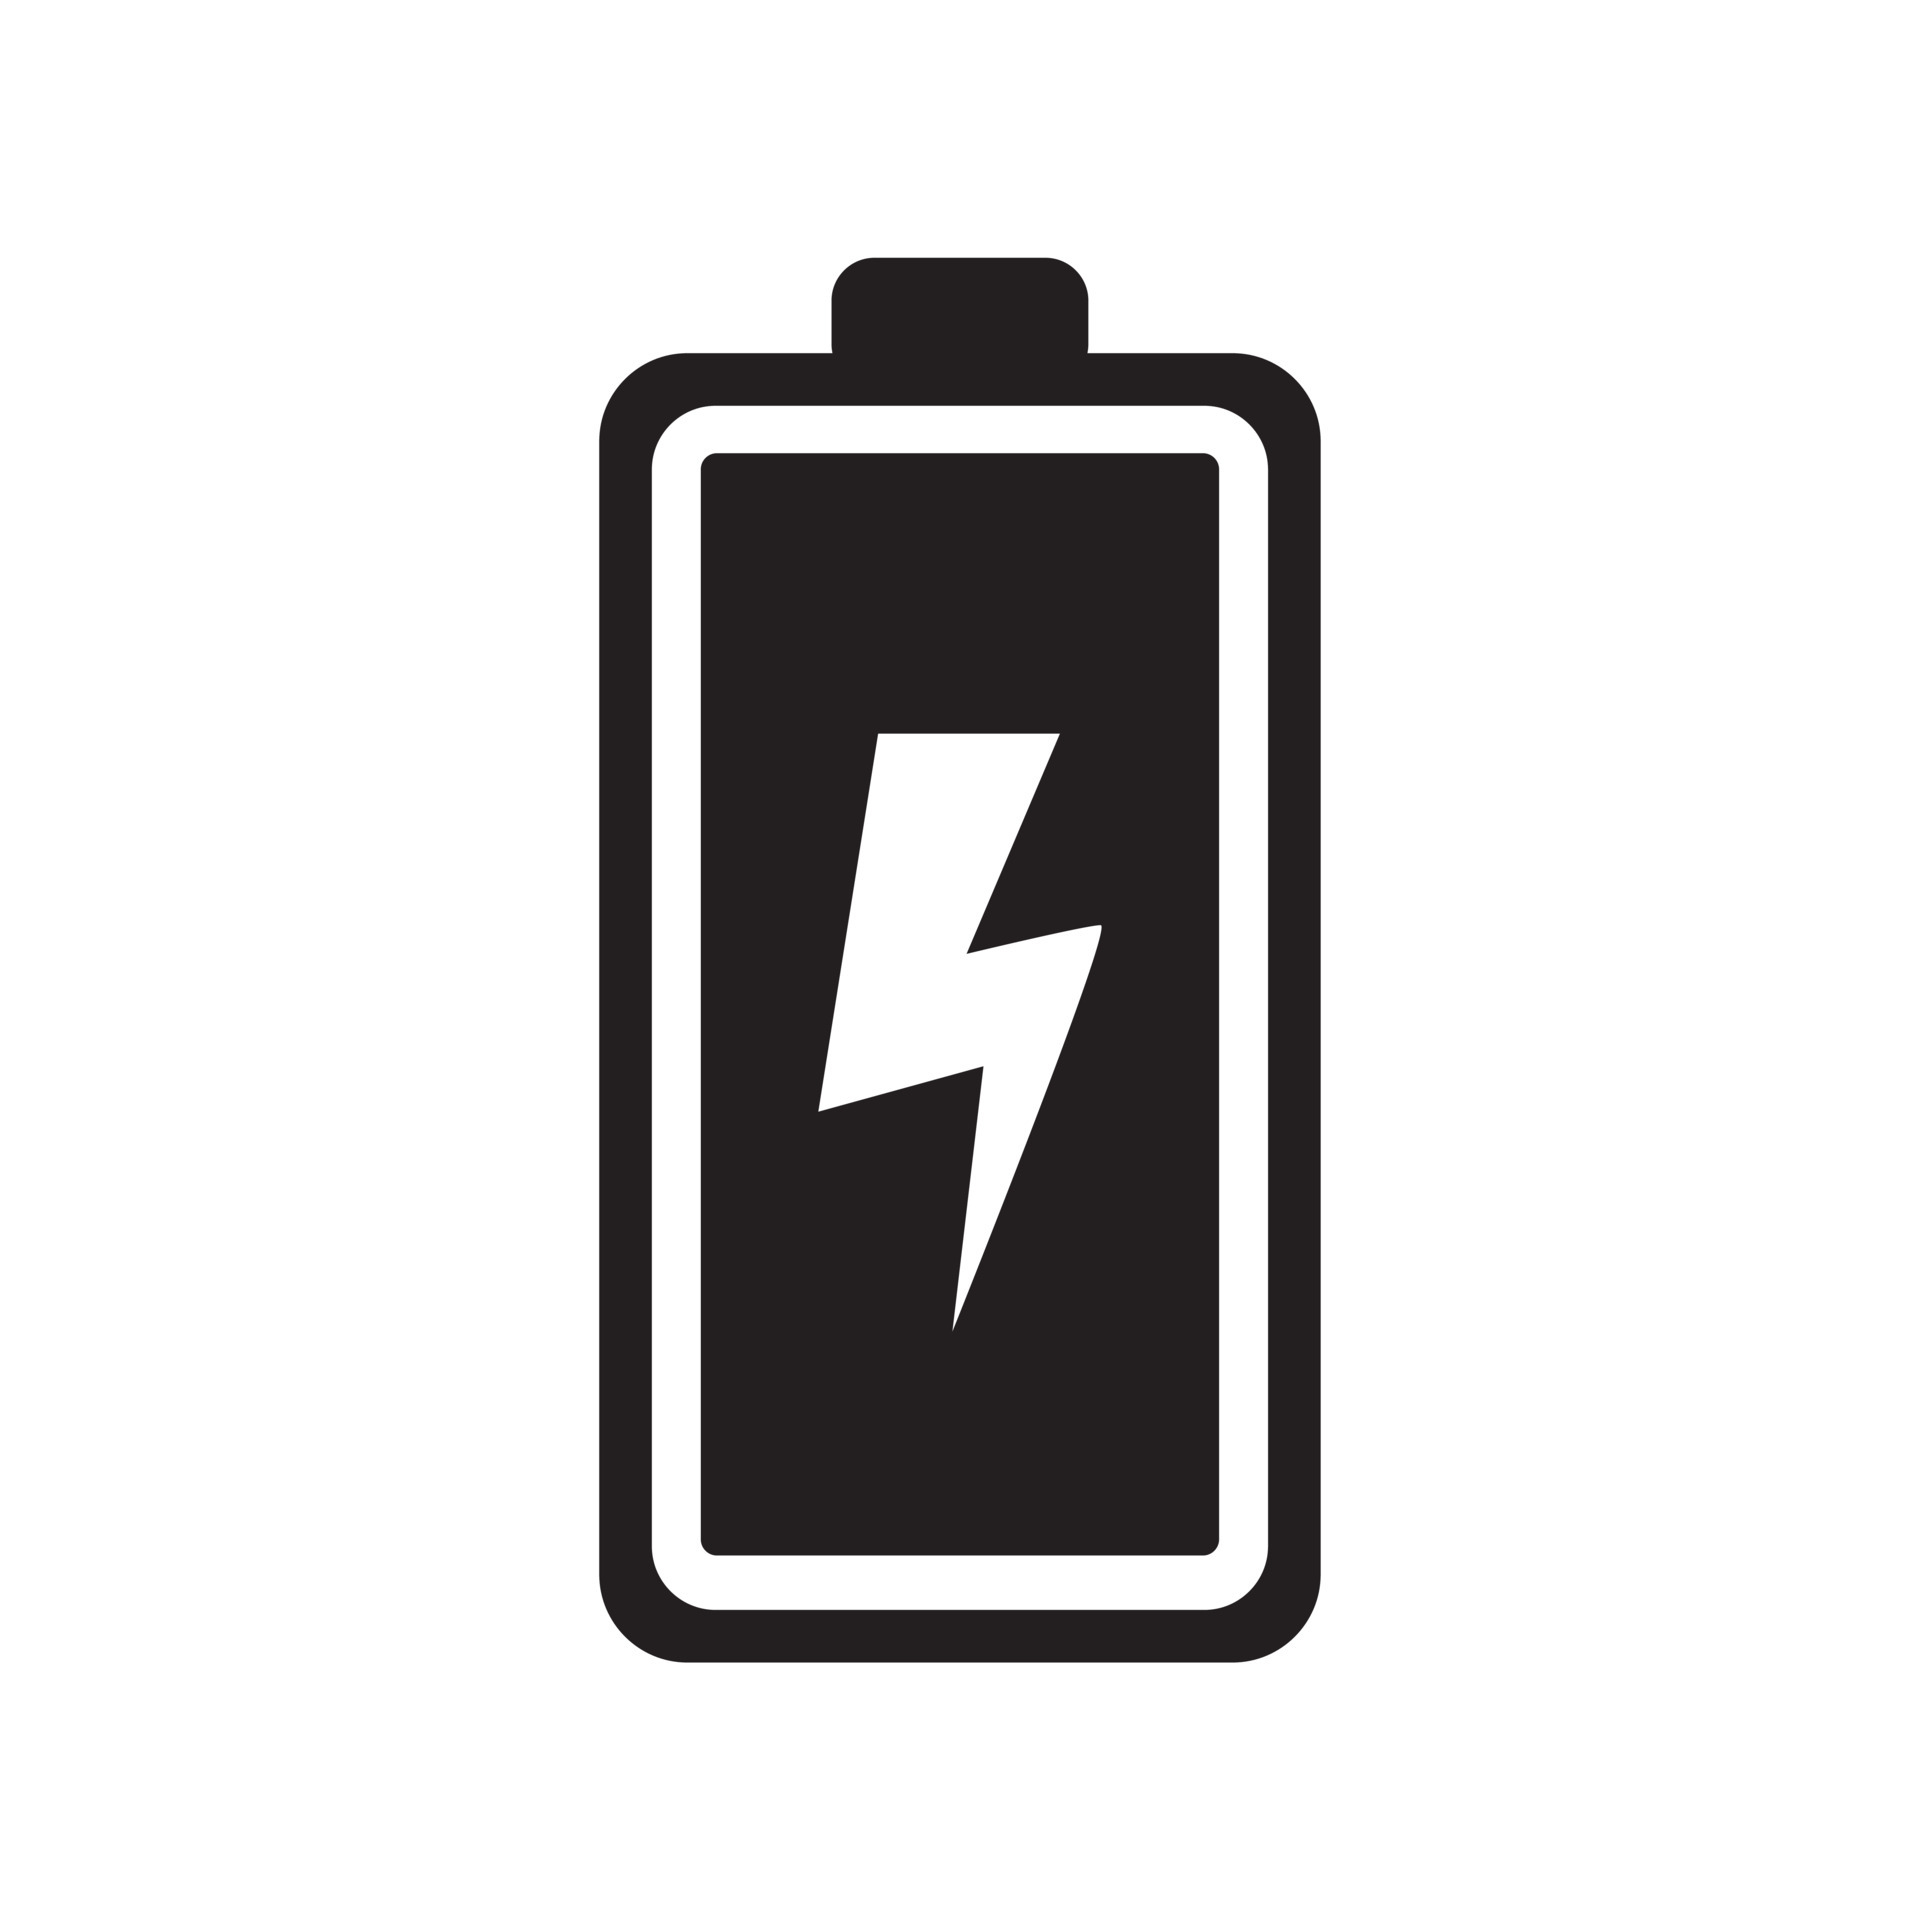 Battery, charge, charging icon - Download on Iconfinder